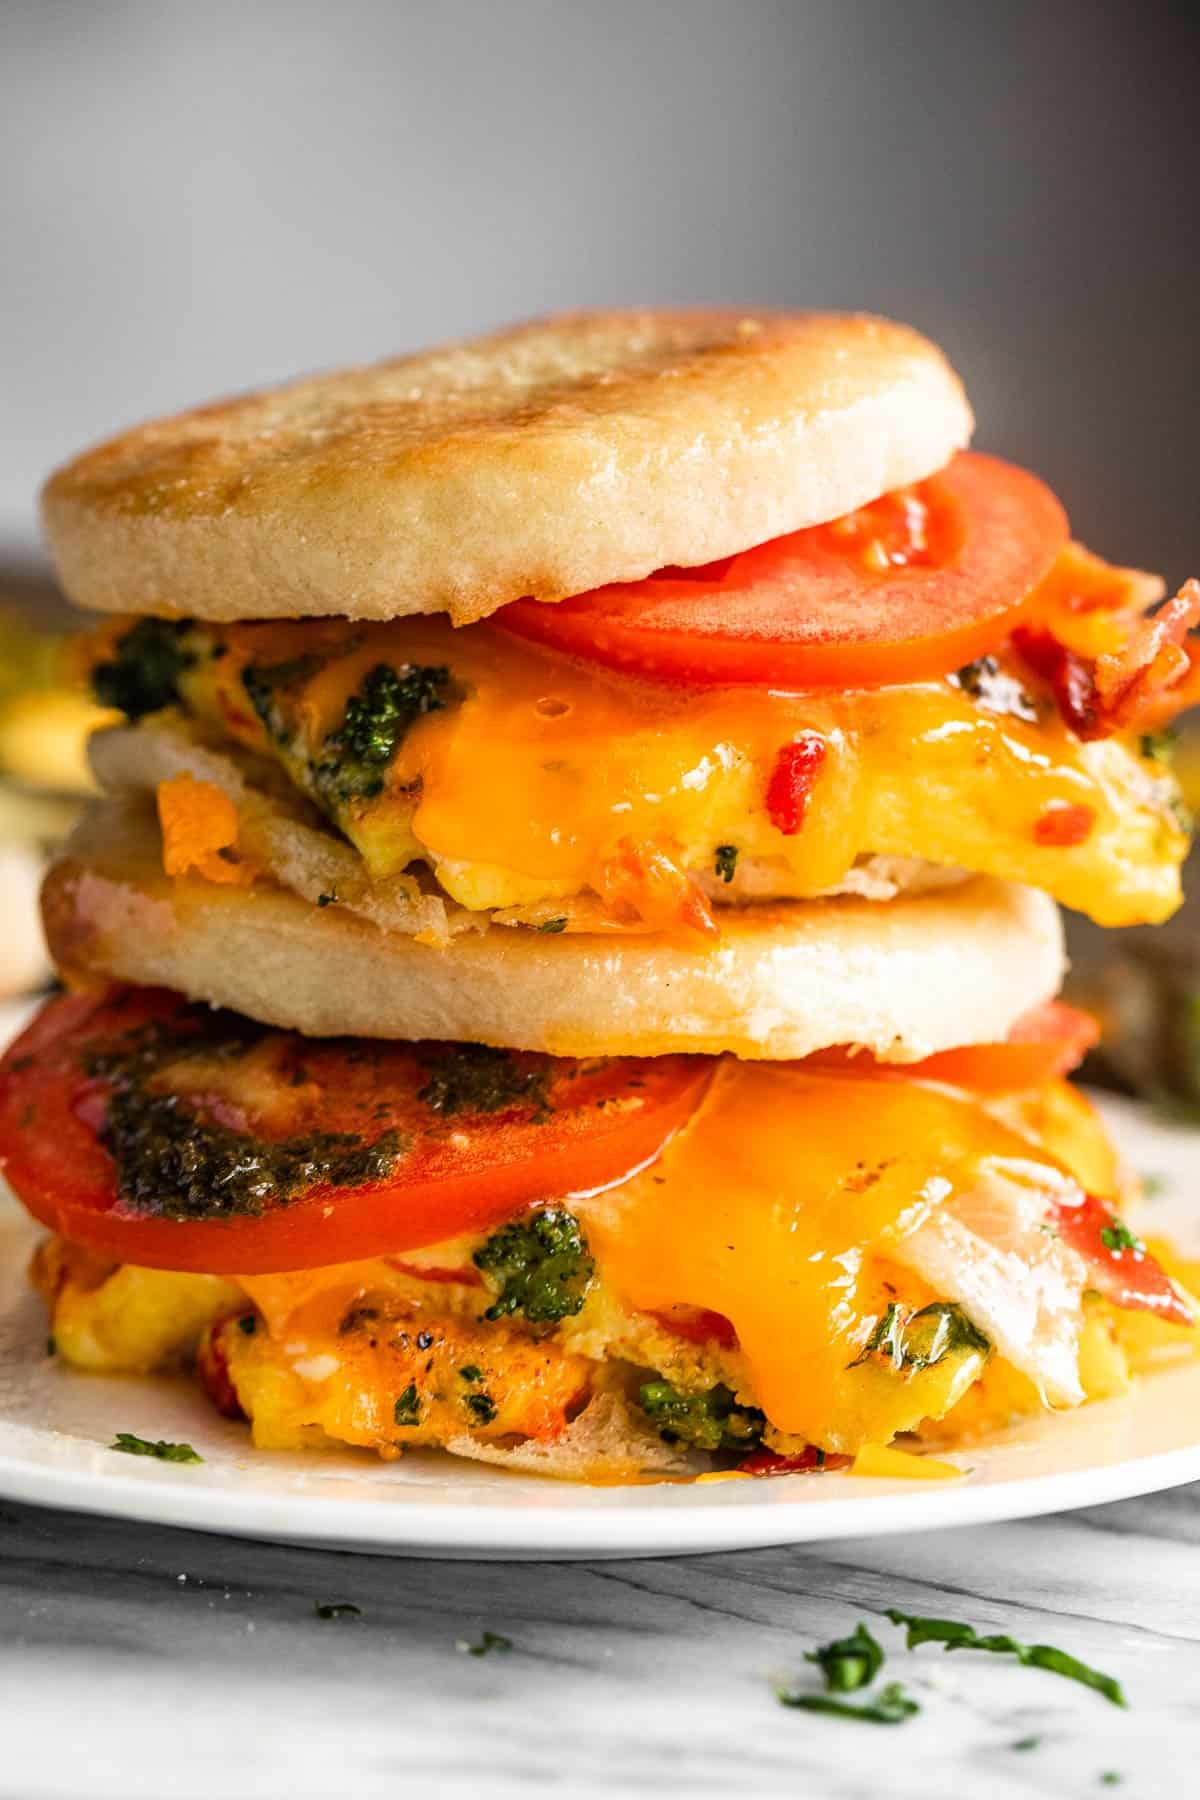 English muffin and egg sandwiches on a plate.